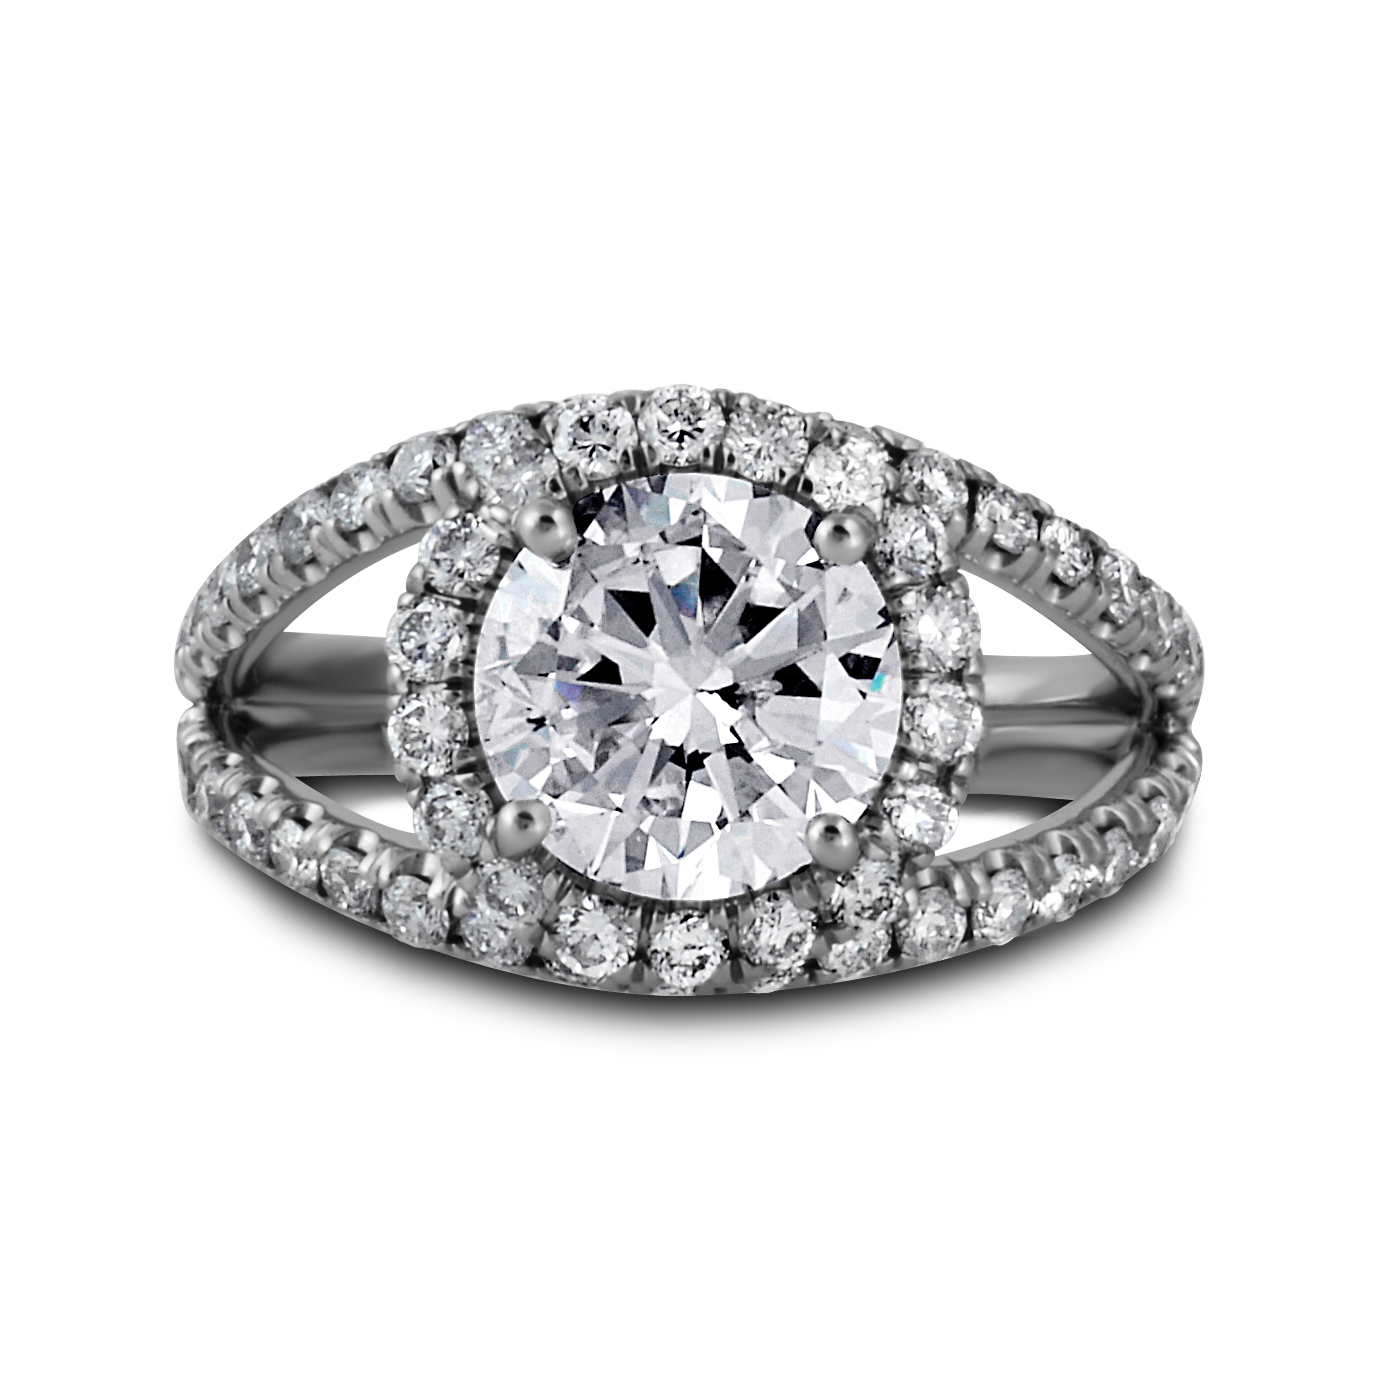 Double Band Diamond Halo Engagement Ring White Gold - Los Angeles Jewelry Store